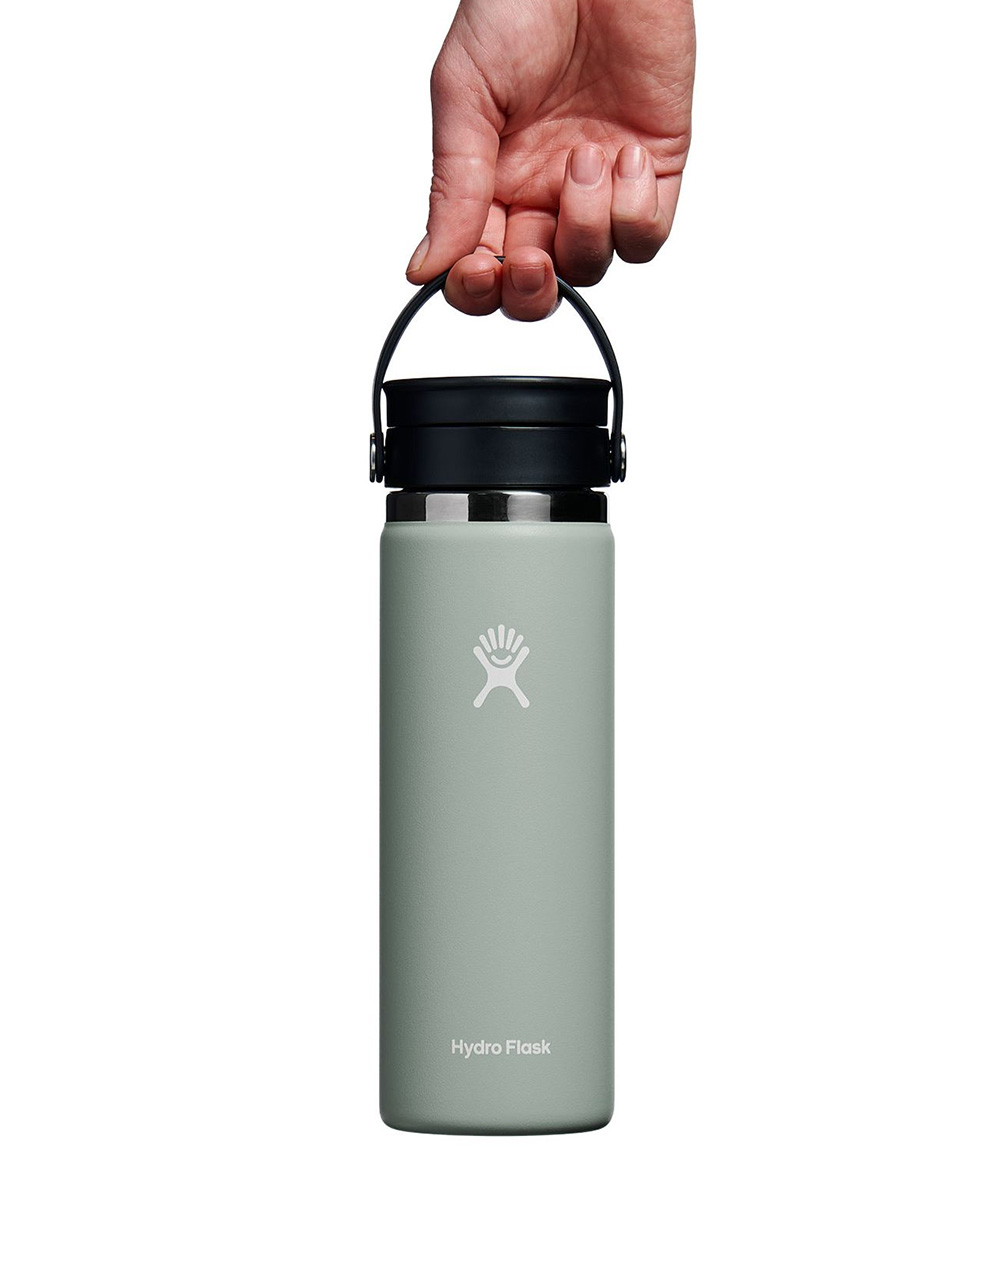 HYDRO FLASK 20 oz Coffee Cup with Flex Sip Lid - AGAVE, Tillys, Salesforce Commerce Cloud